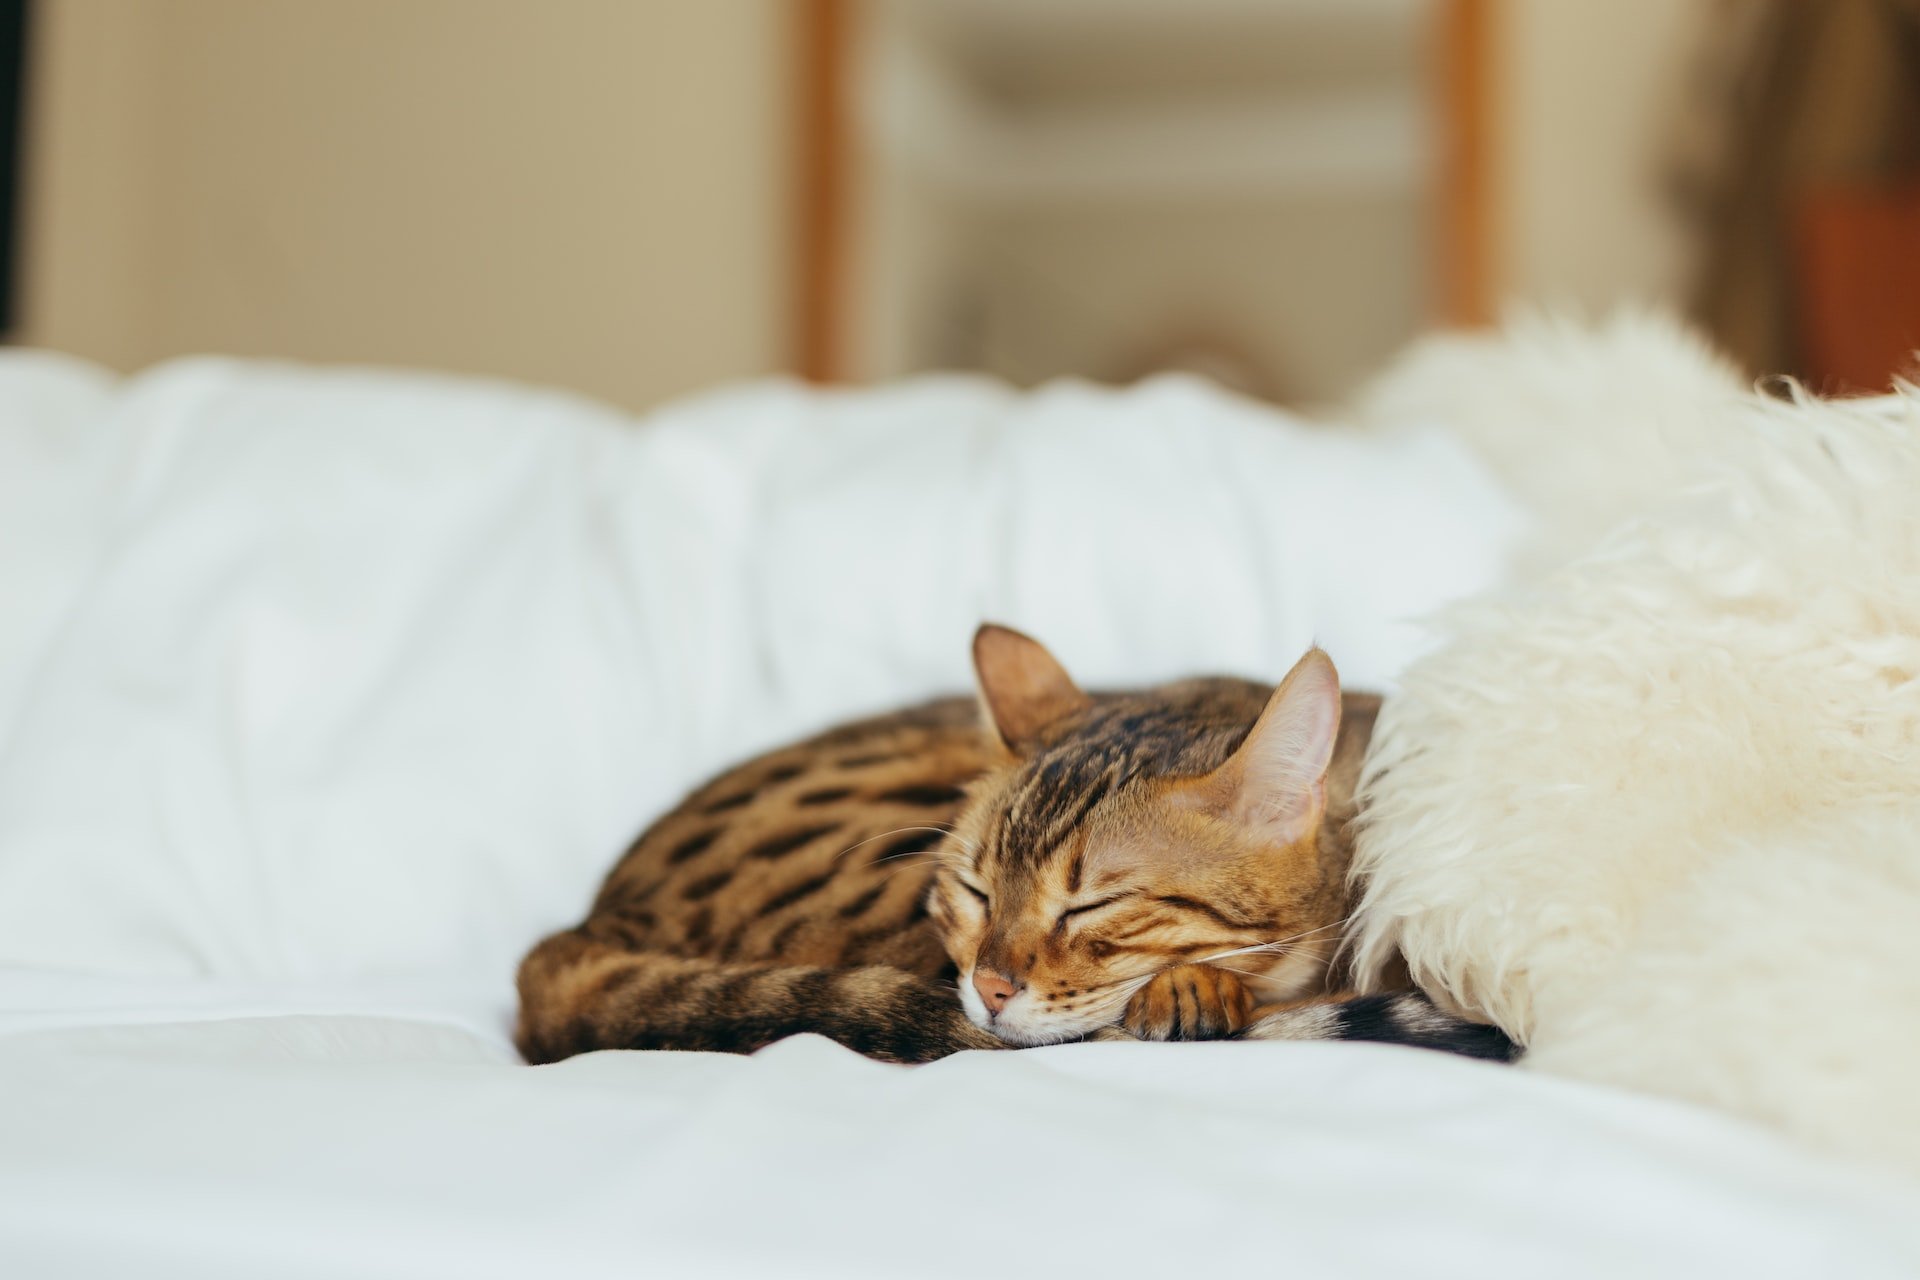 A Lone Star Bengal cat sleeping on a white couch.